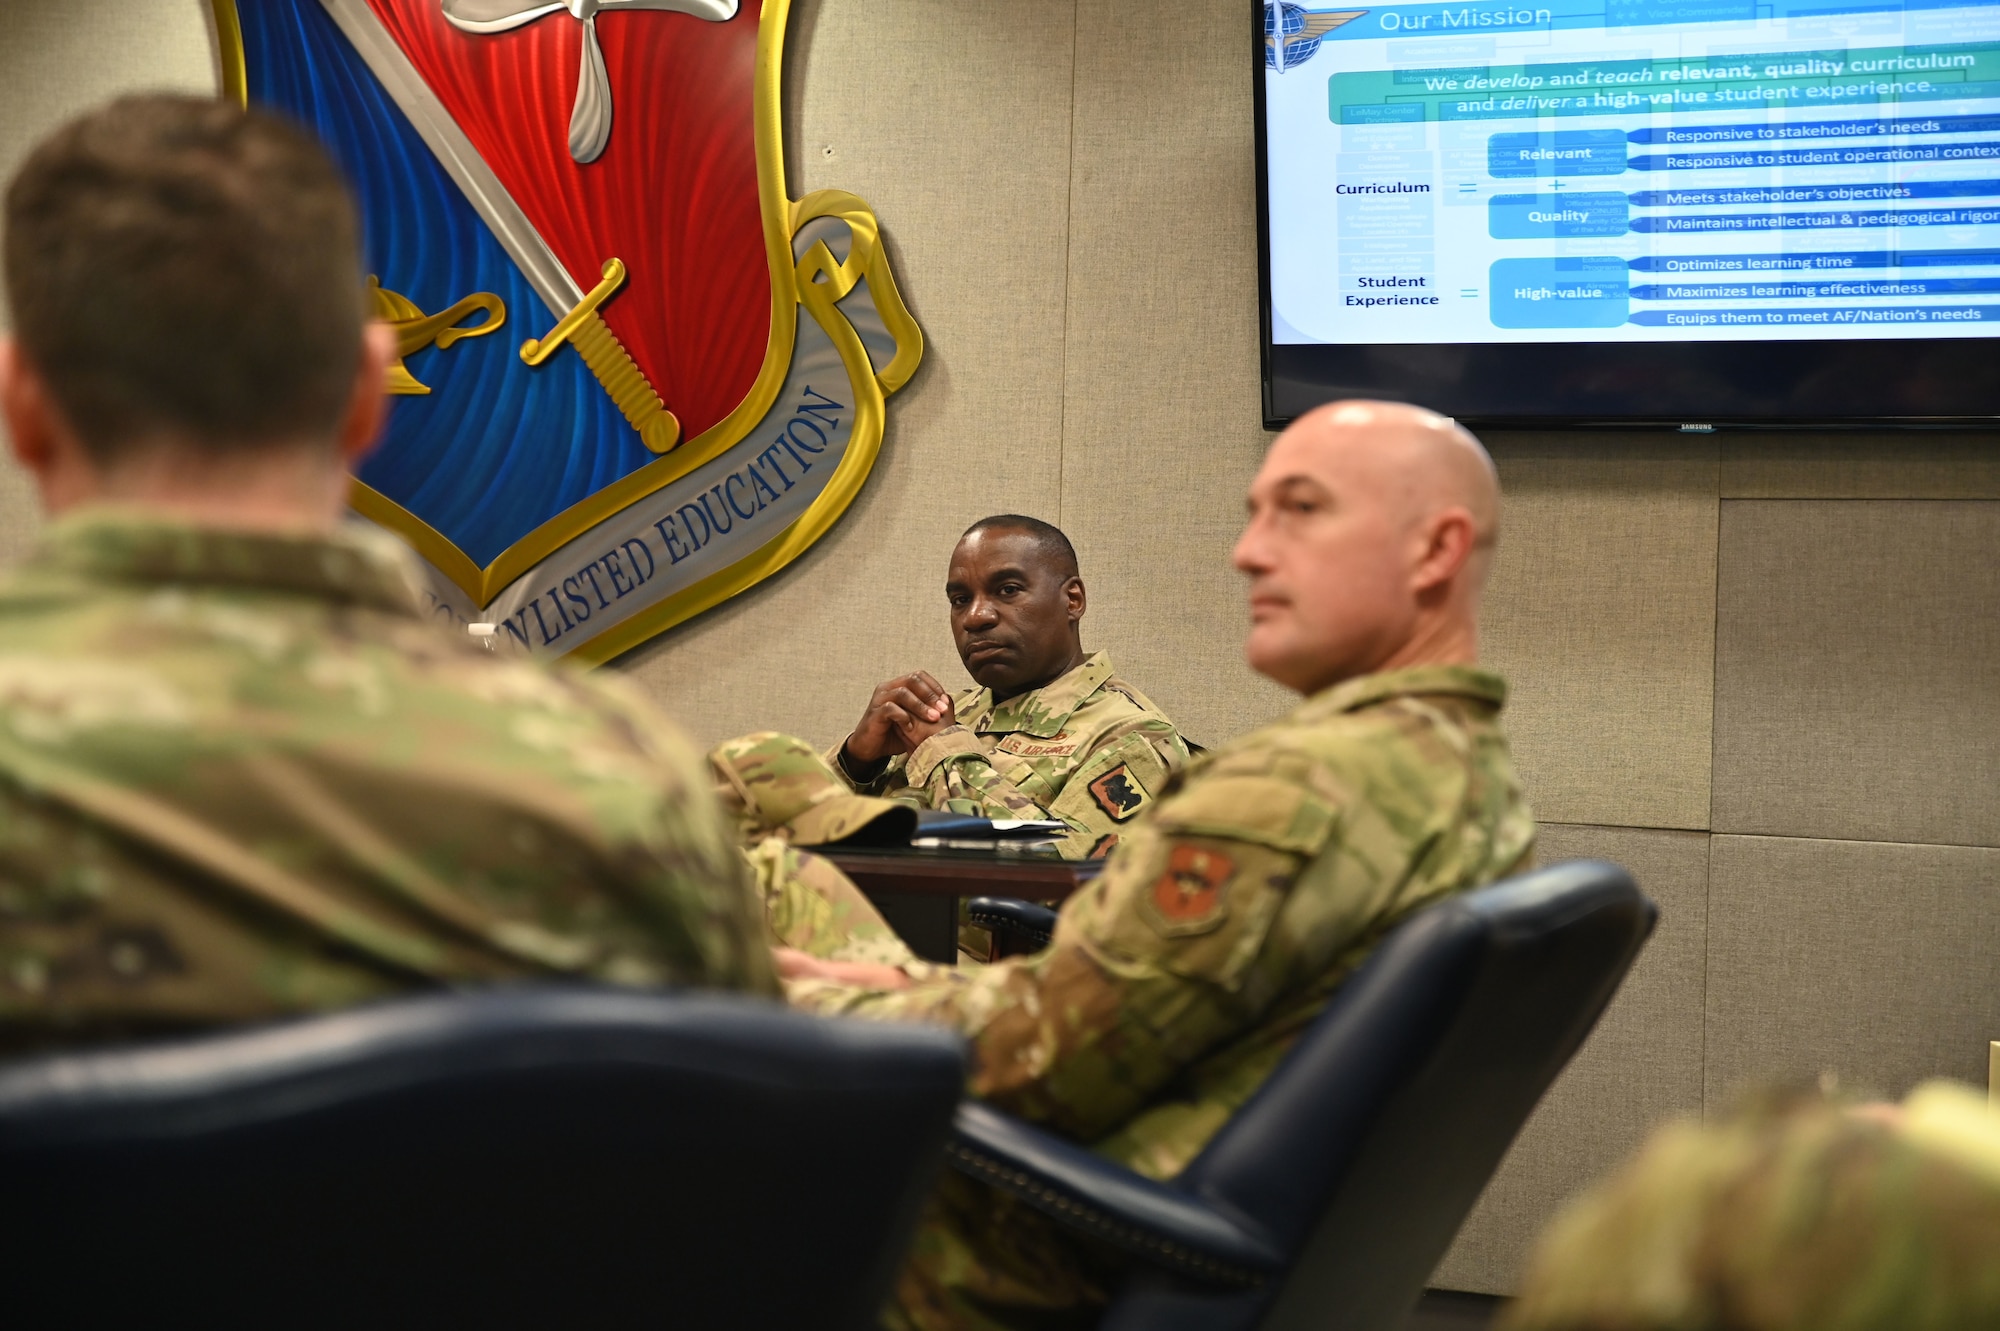 U.S. Air Force Chief Master Sgt. Maurice L. Williams, center, command chief, Air National Guard, listens as he is briefed on the current curriculum and student experience offered during a visit to the Thomas N. Barnes Center, Maxwell-Gunter Annex, Alabama, Oct. 18, 2023. Williams wanted to better understand where course improvements are most needed to enhance the overall distance learning experience for all Airmen. (U.S Air National Guard photo by Master Sgt. Chelcee Arnold)